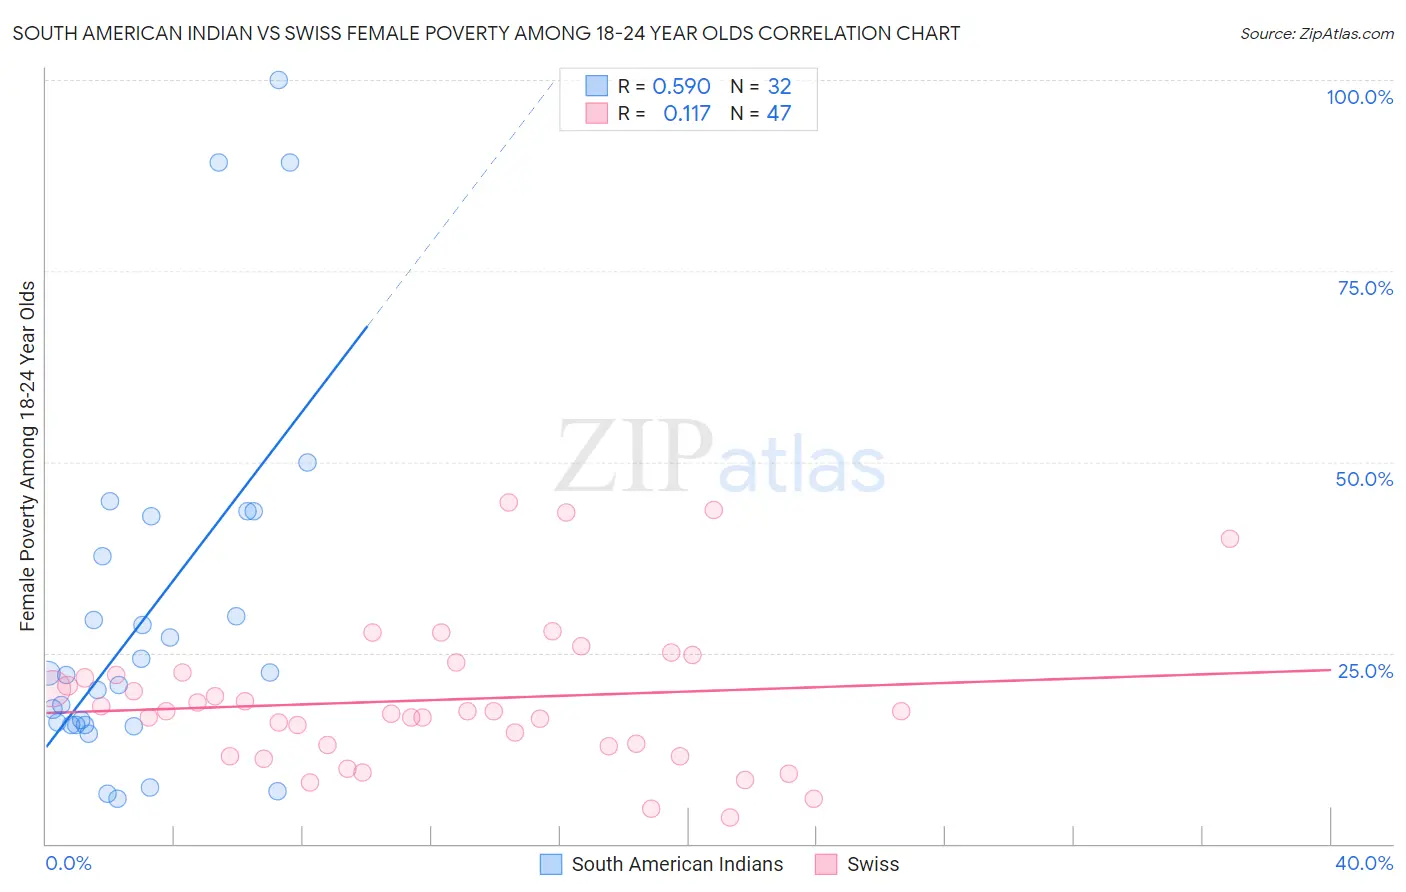 South American Indian vs Swiss Female Poverty Among 18-24 Year Olds